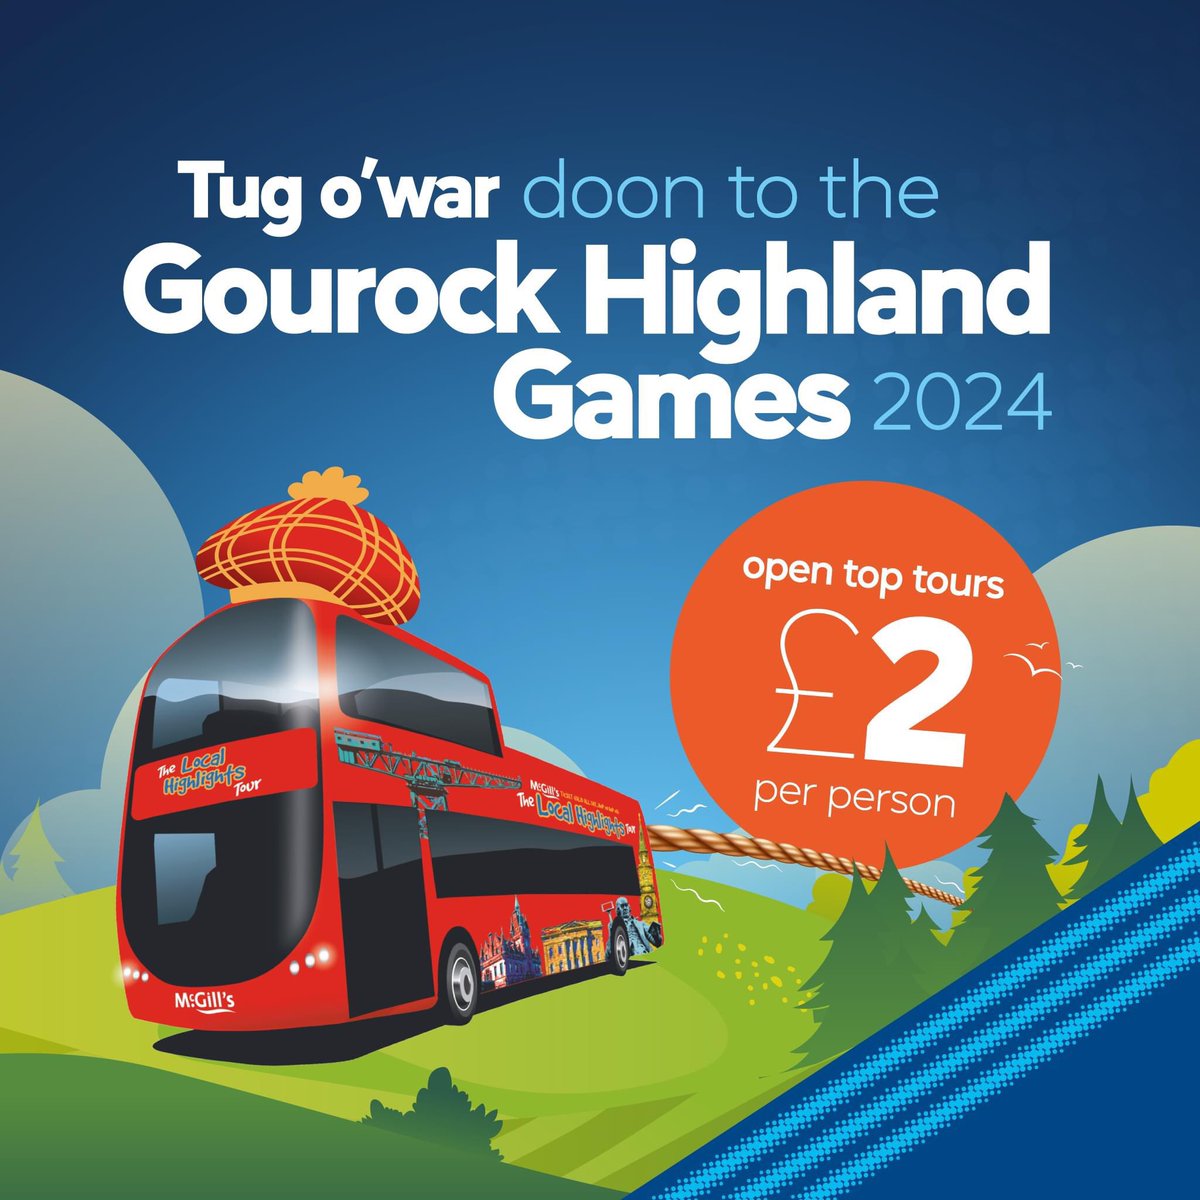 Enjoy the Gourock Highland Games this Sun 12 May at Battery Park 🏴󠁧󠁢󠁳󠁣󠁴󠁿 Experience the bagpipes, traditional highland dancing and spectate the heavyweights! 🏋️‍♀️ #ClydeFlyer 901 drops you off outside and our Open Top tour will take you around Gourock Bay! ℹ️ ow.ly/pXpO50RzJzP